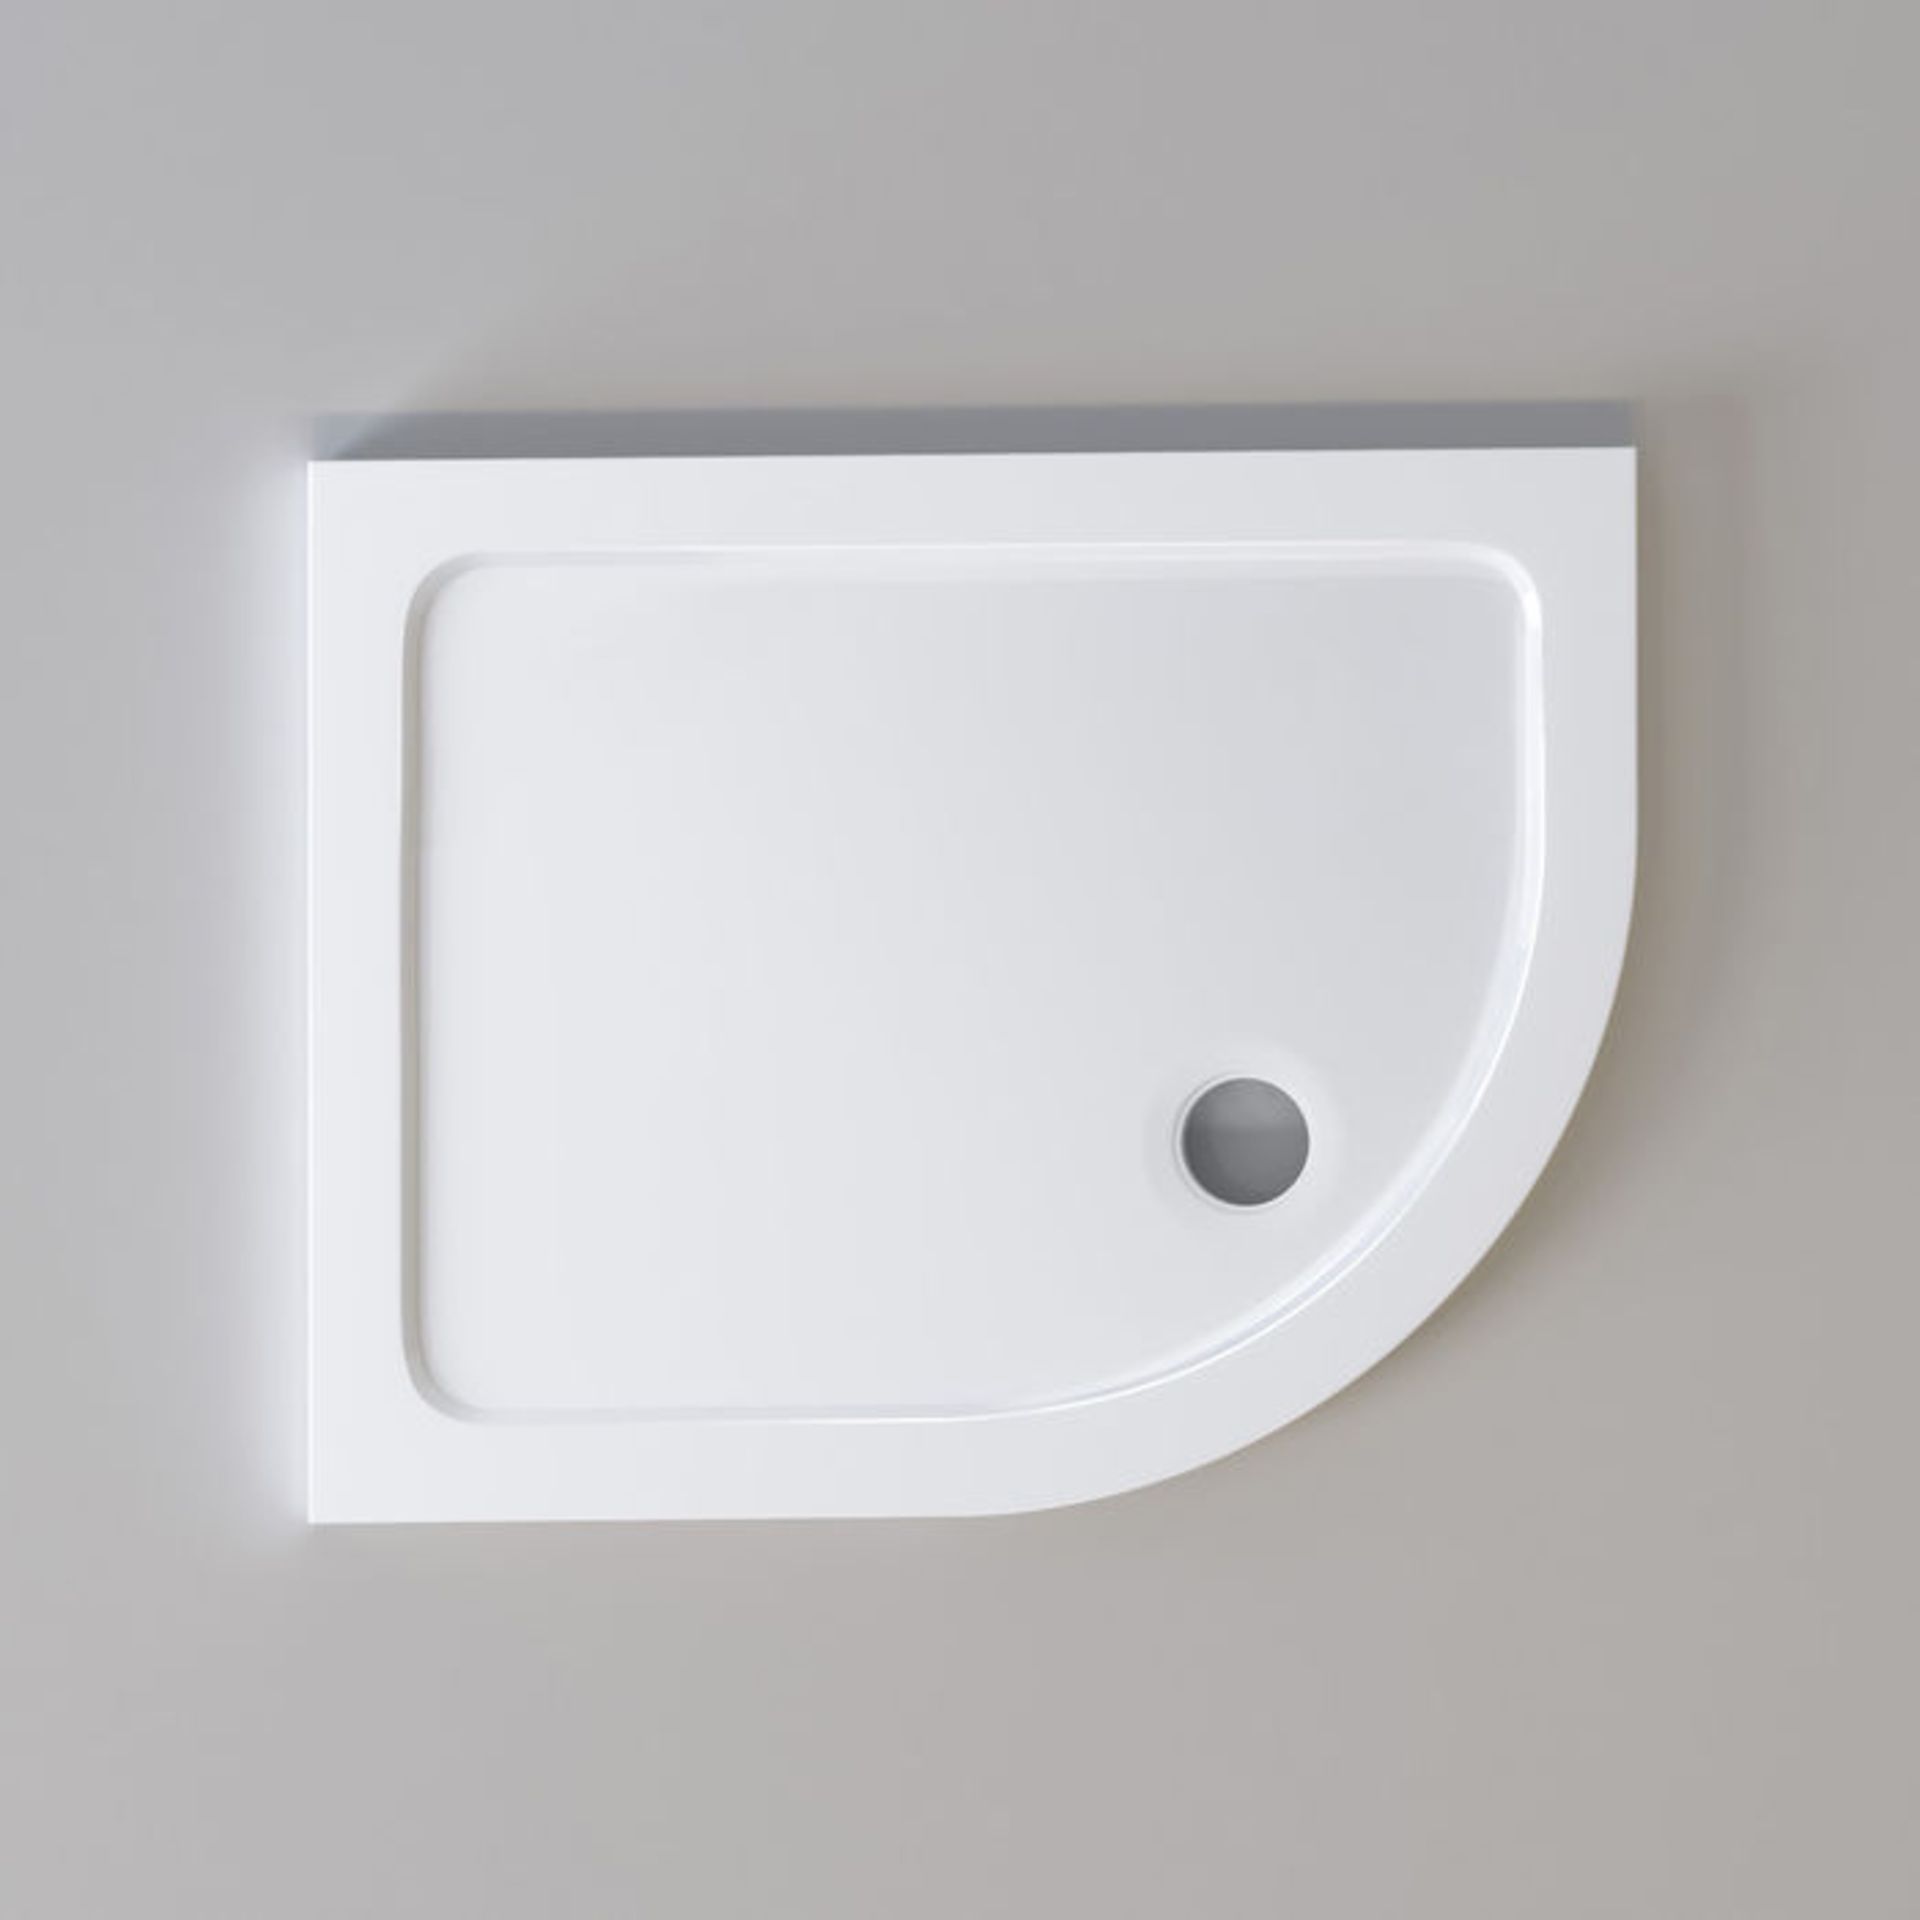 (AH84) 1000x800mm Offset Quadrant Ultraslim Stone Shower Tray - Right. RRP £249.99. Low profile